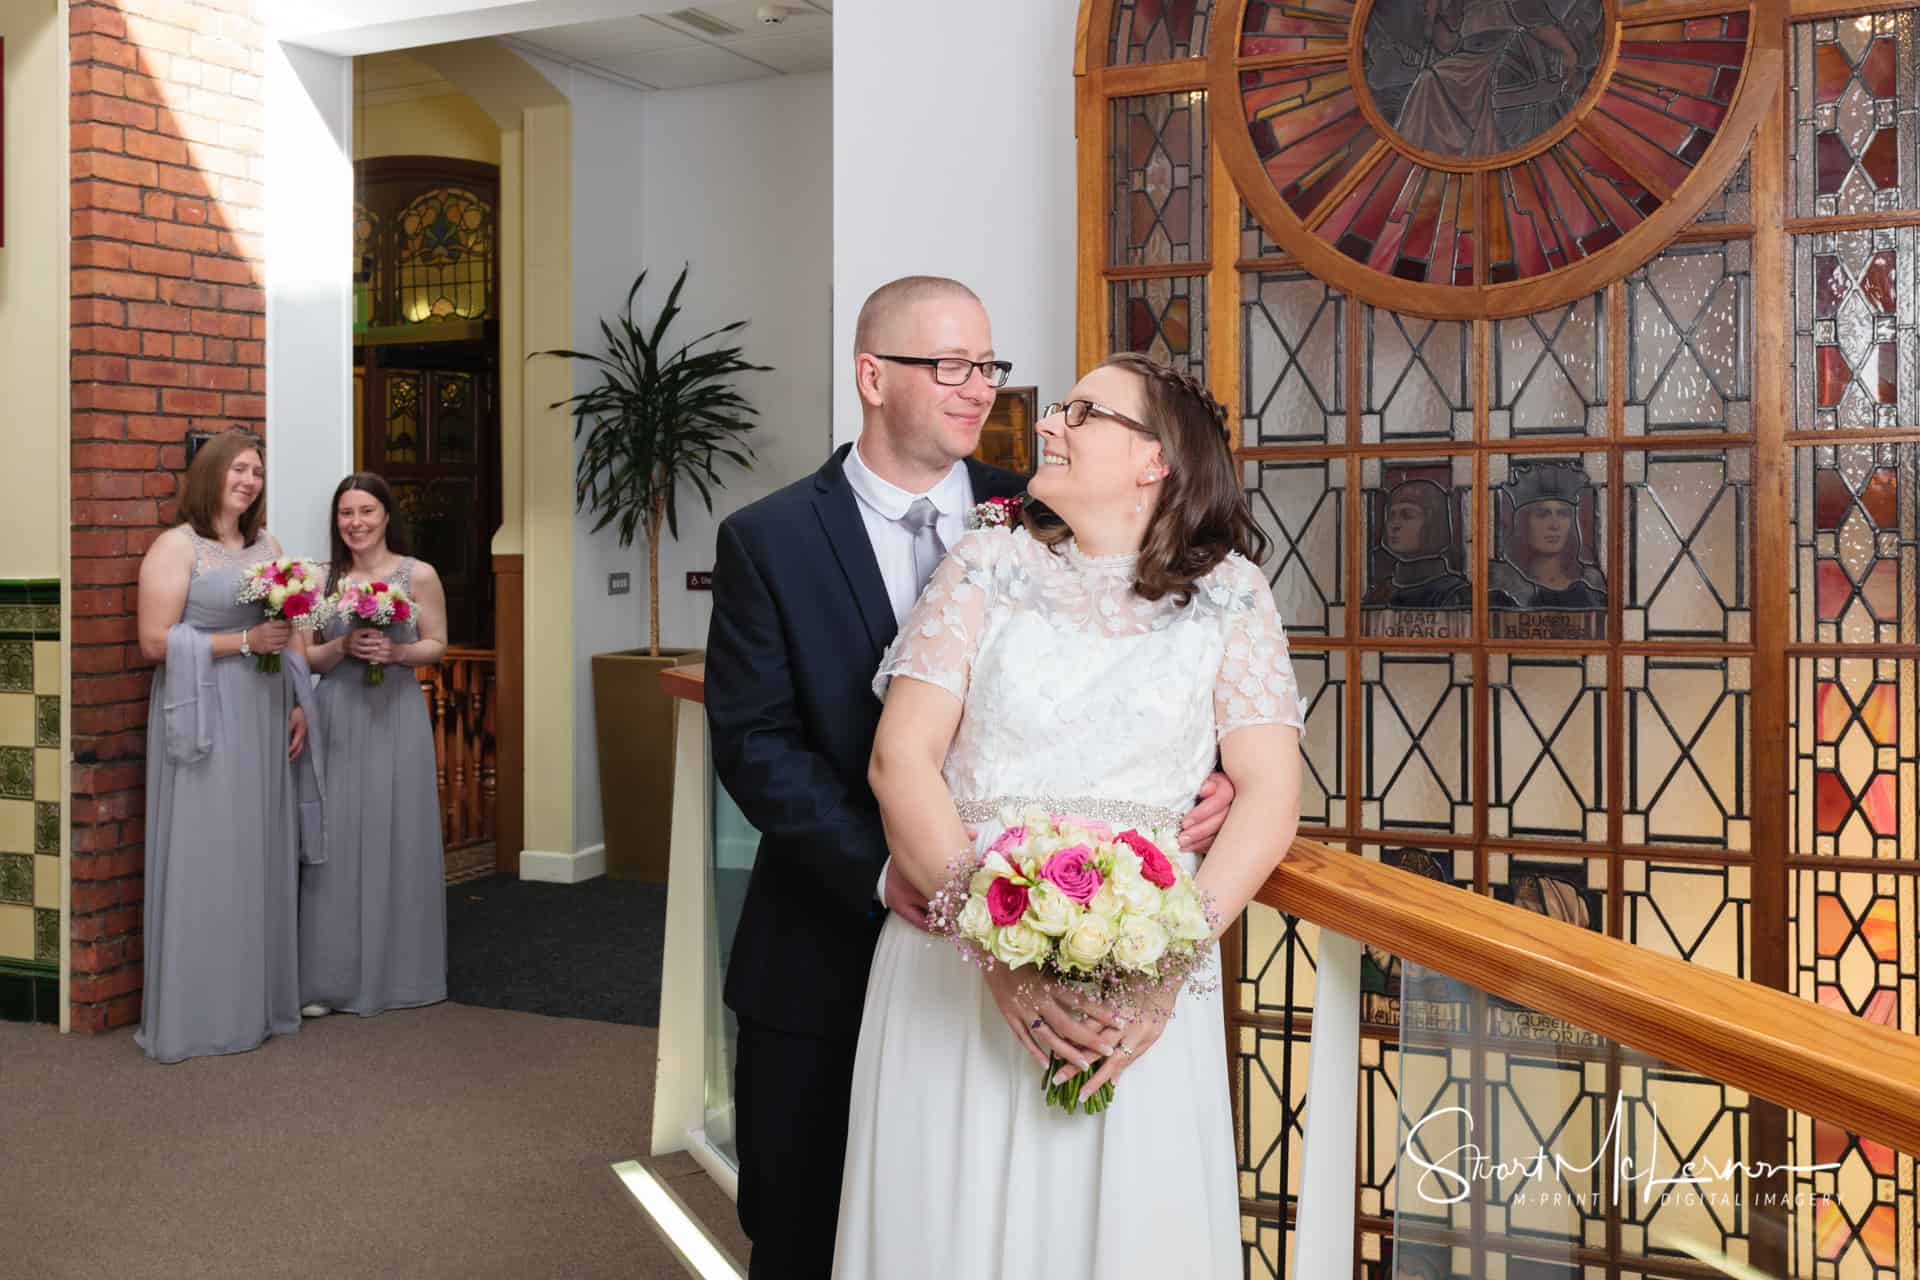 Dukinfield Town Hall Wedding Photography by Stuart McLernon | M-PRINT Digital Imagery